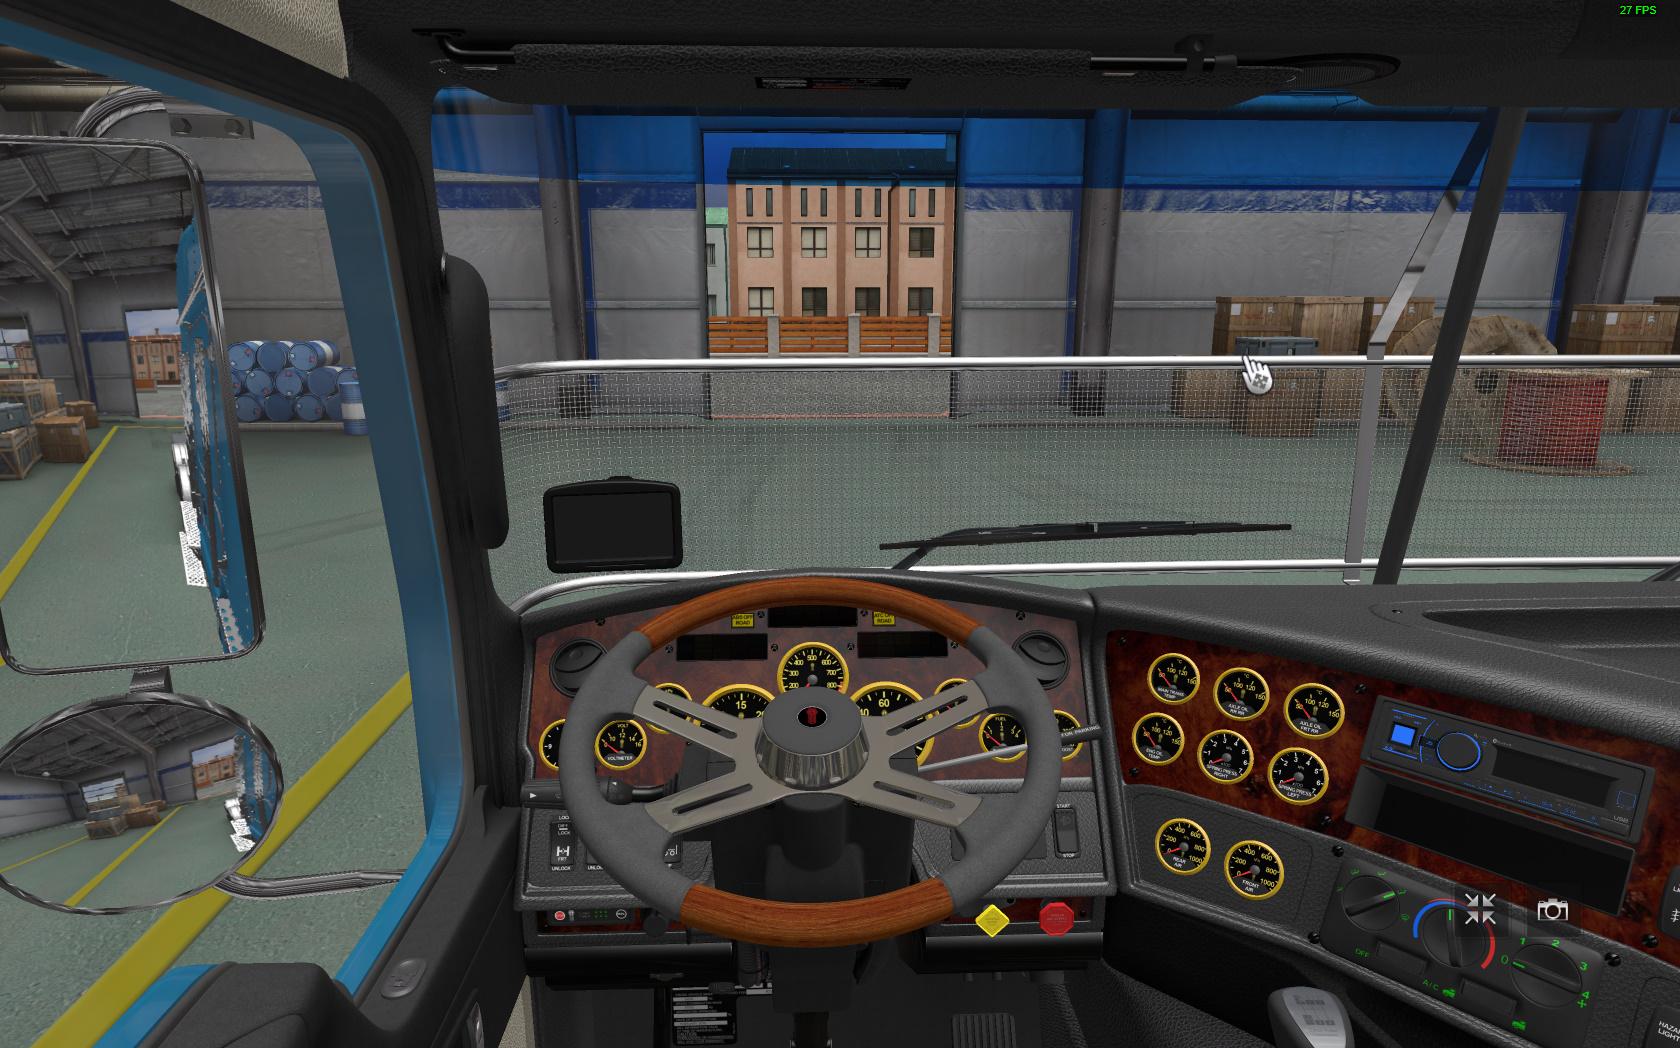 Kenworth K200 for 1.25 Fixed version!